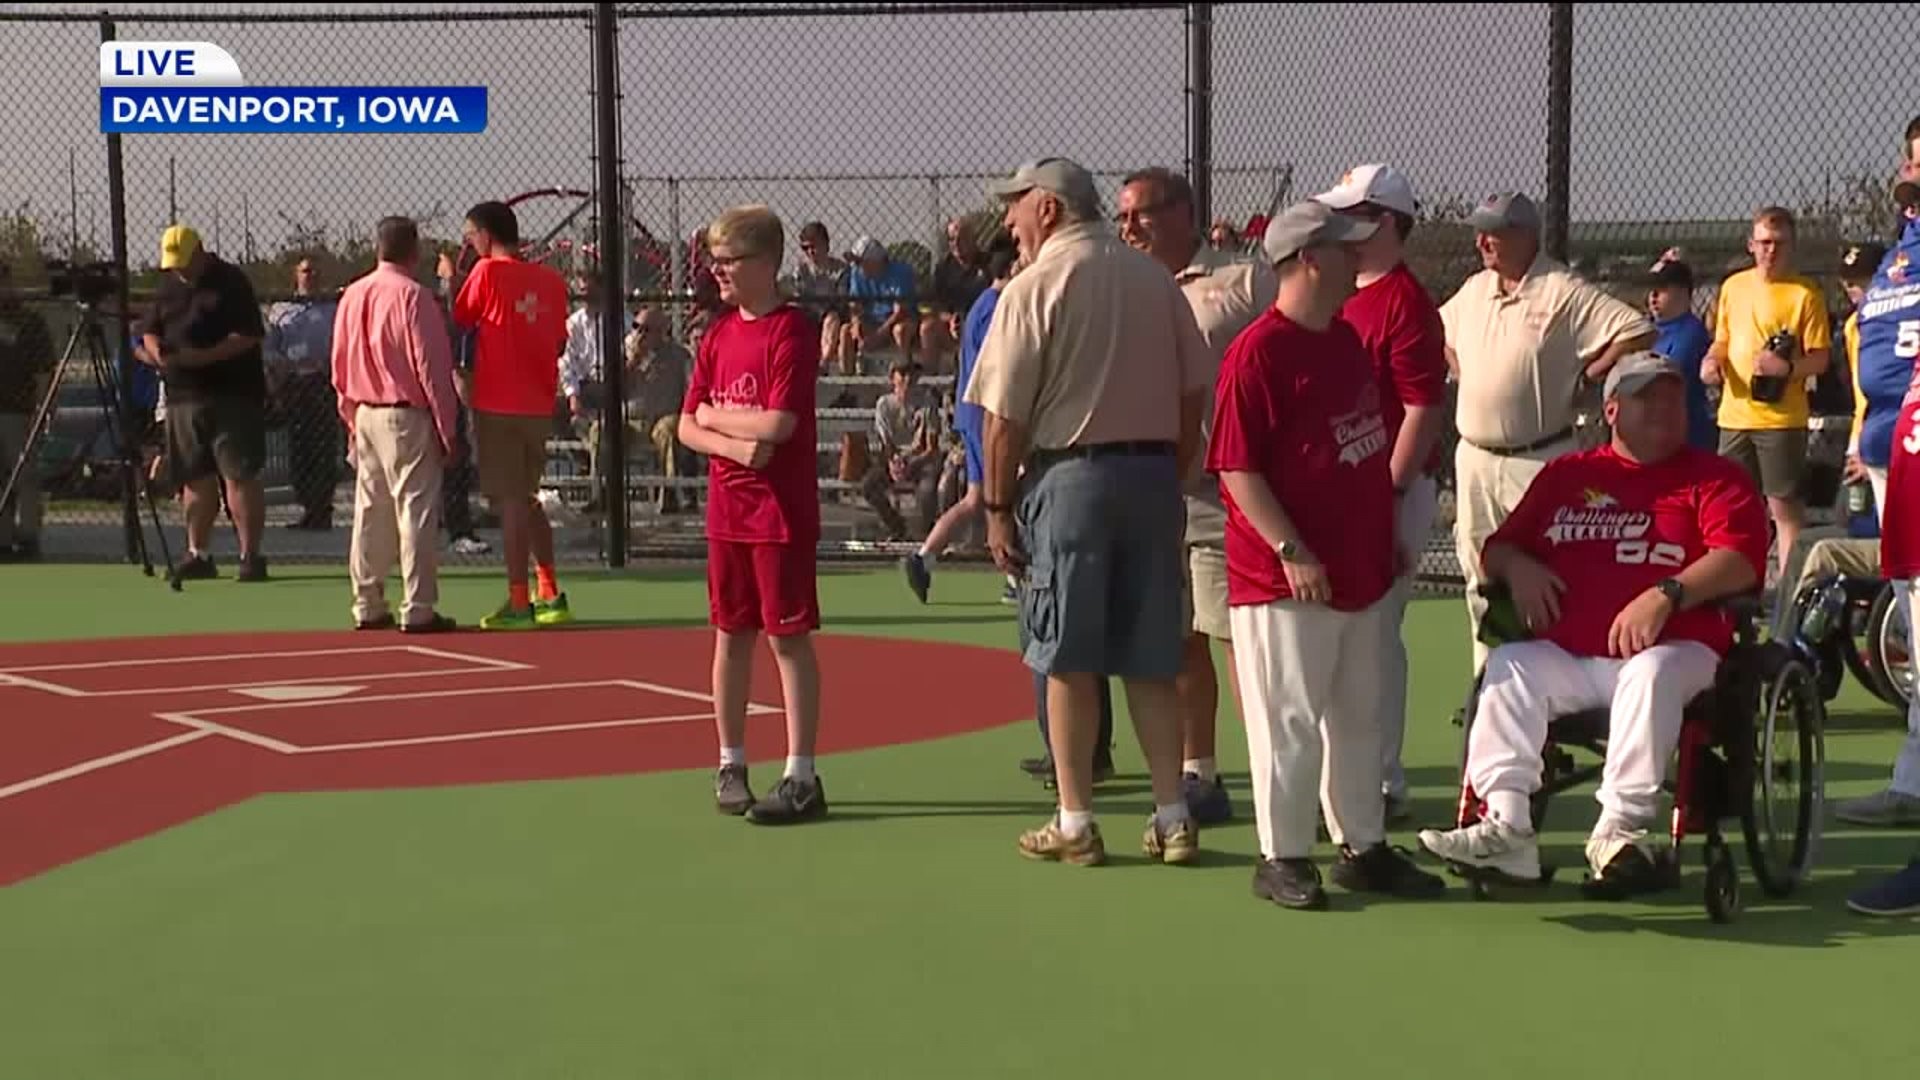 Miracle Field opens in Davenport